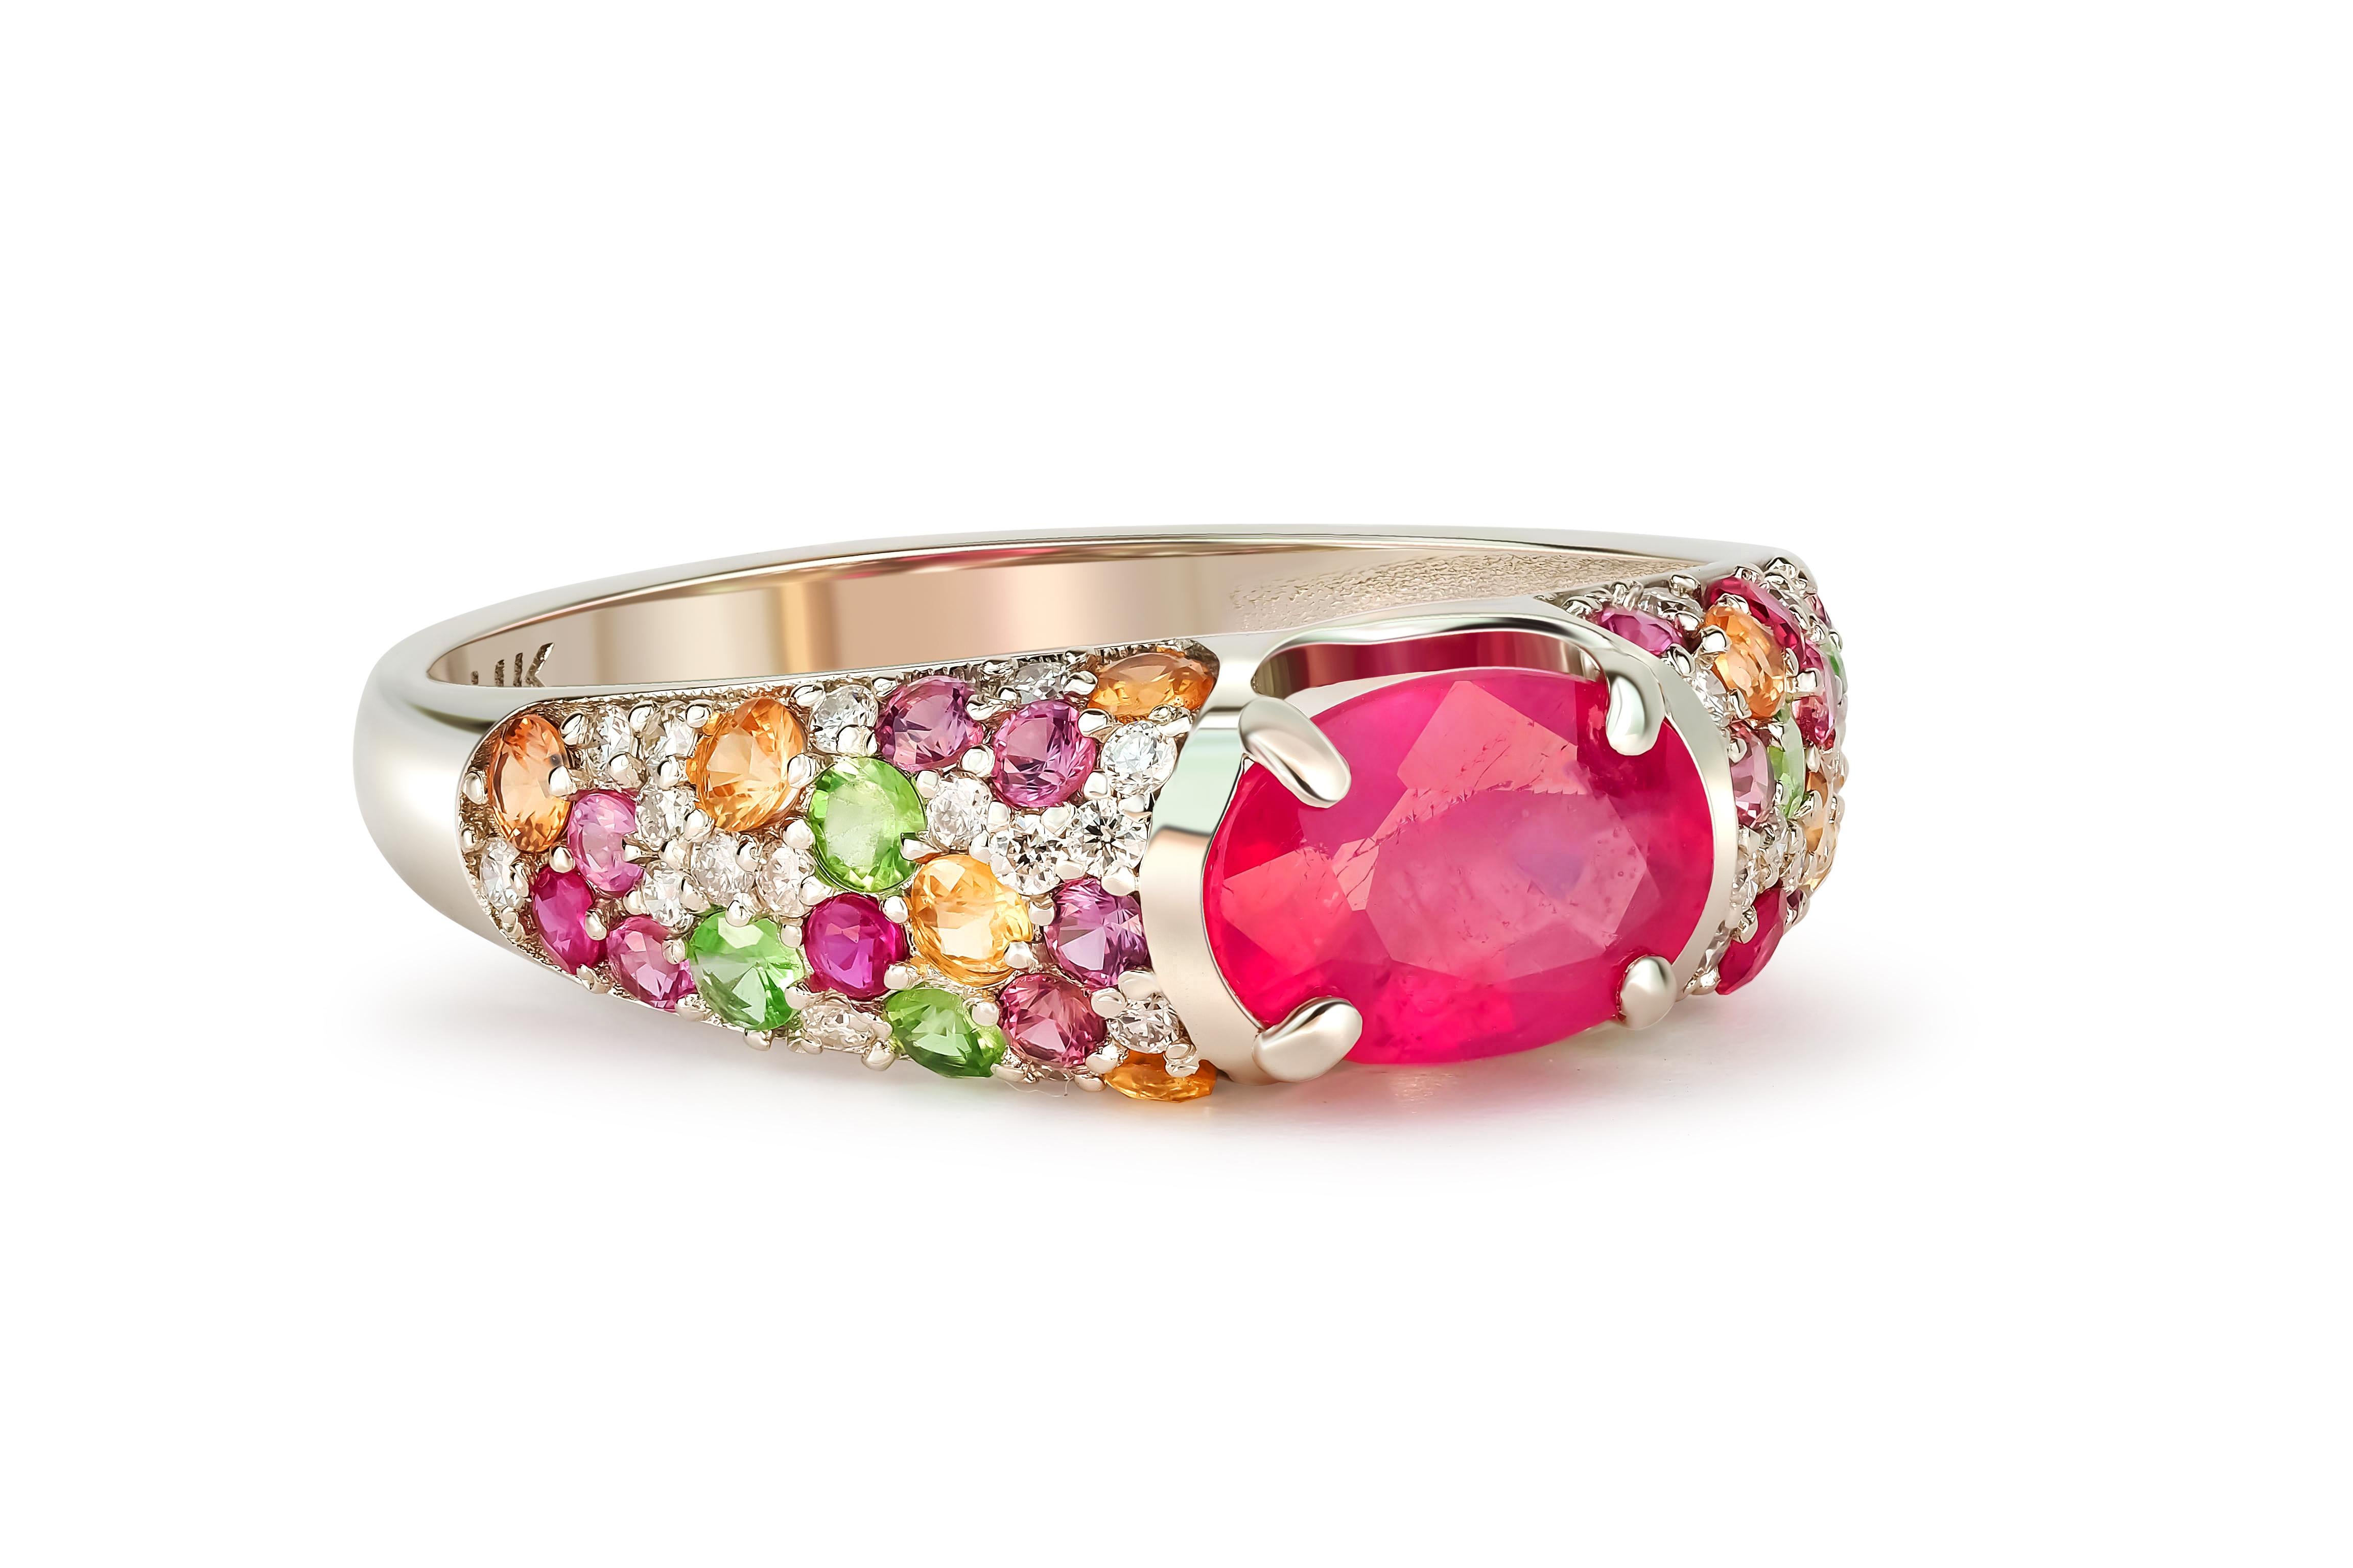 For Sale:  14k gold ruby and multicolored gemstones ring. 3